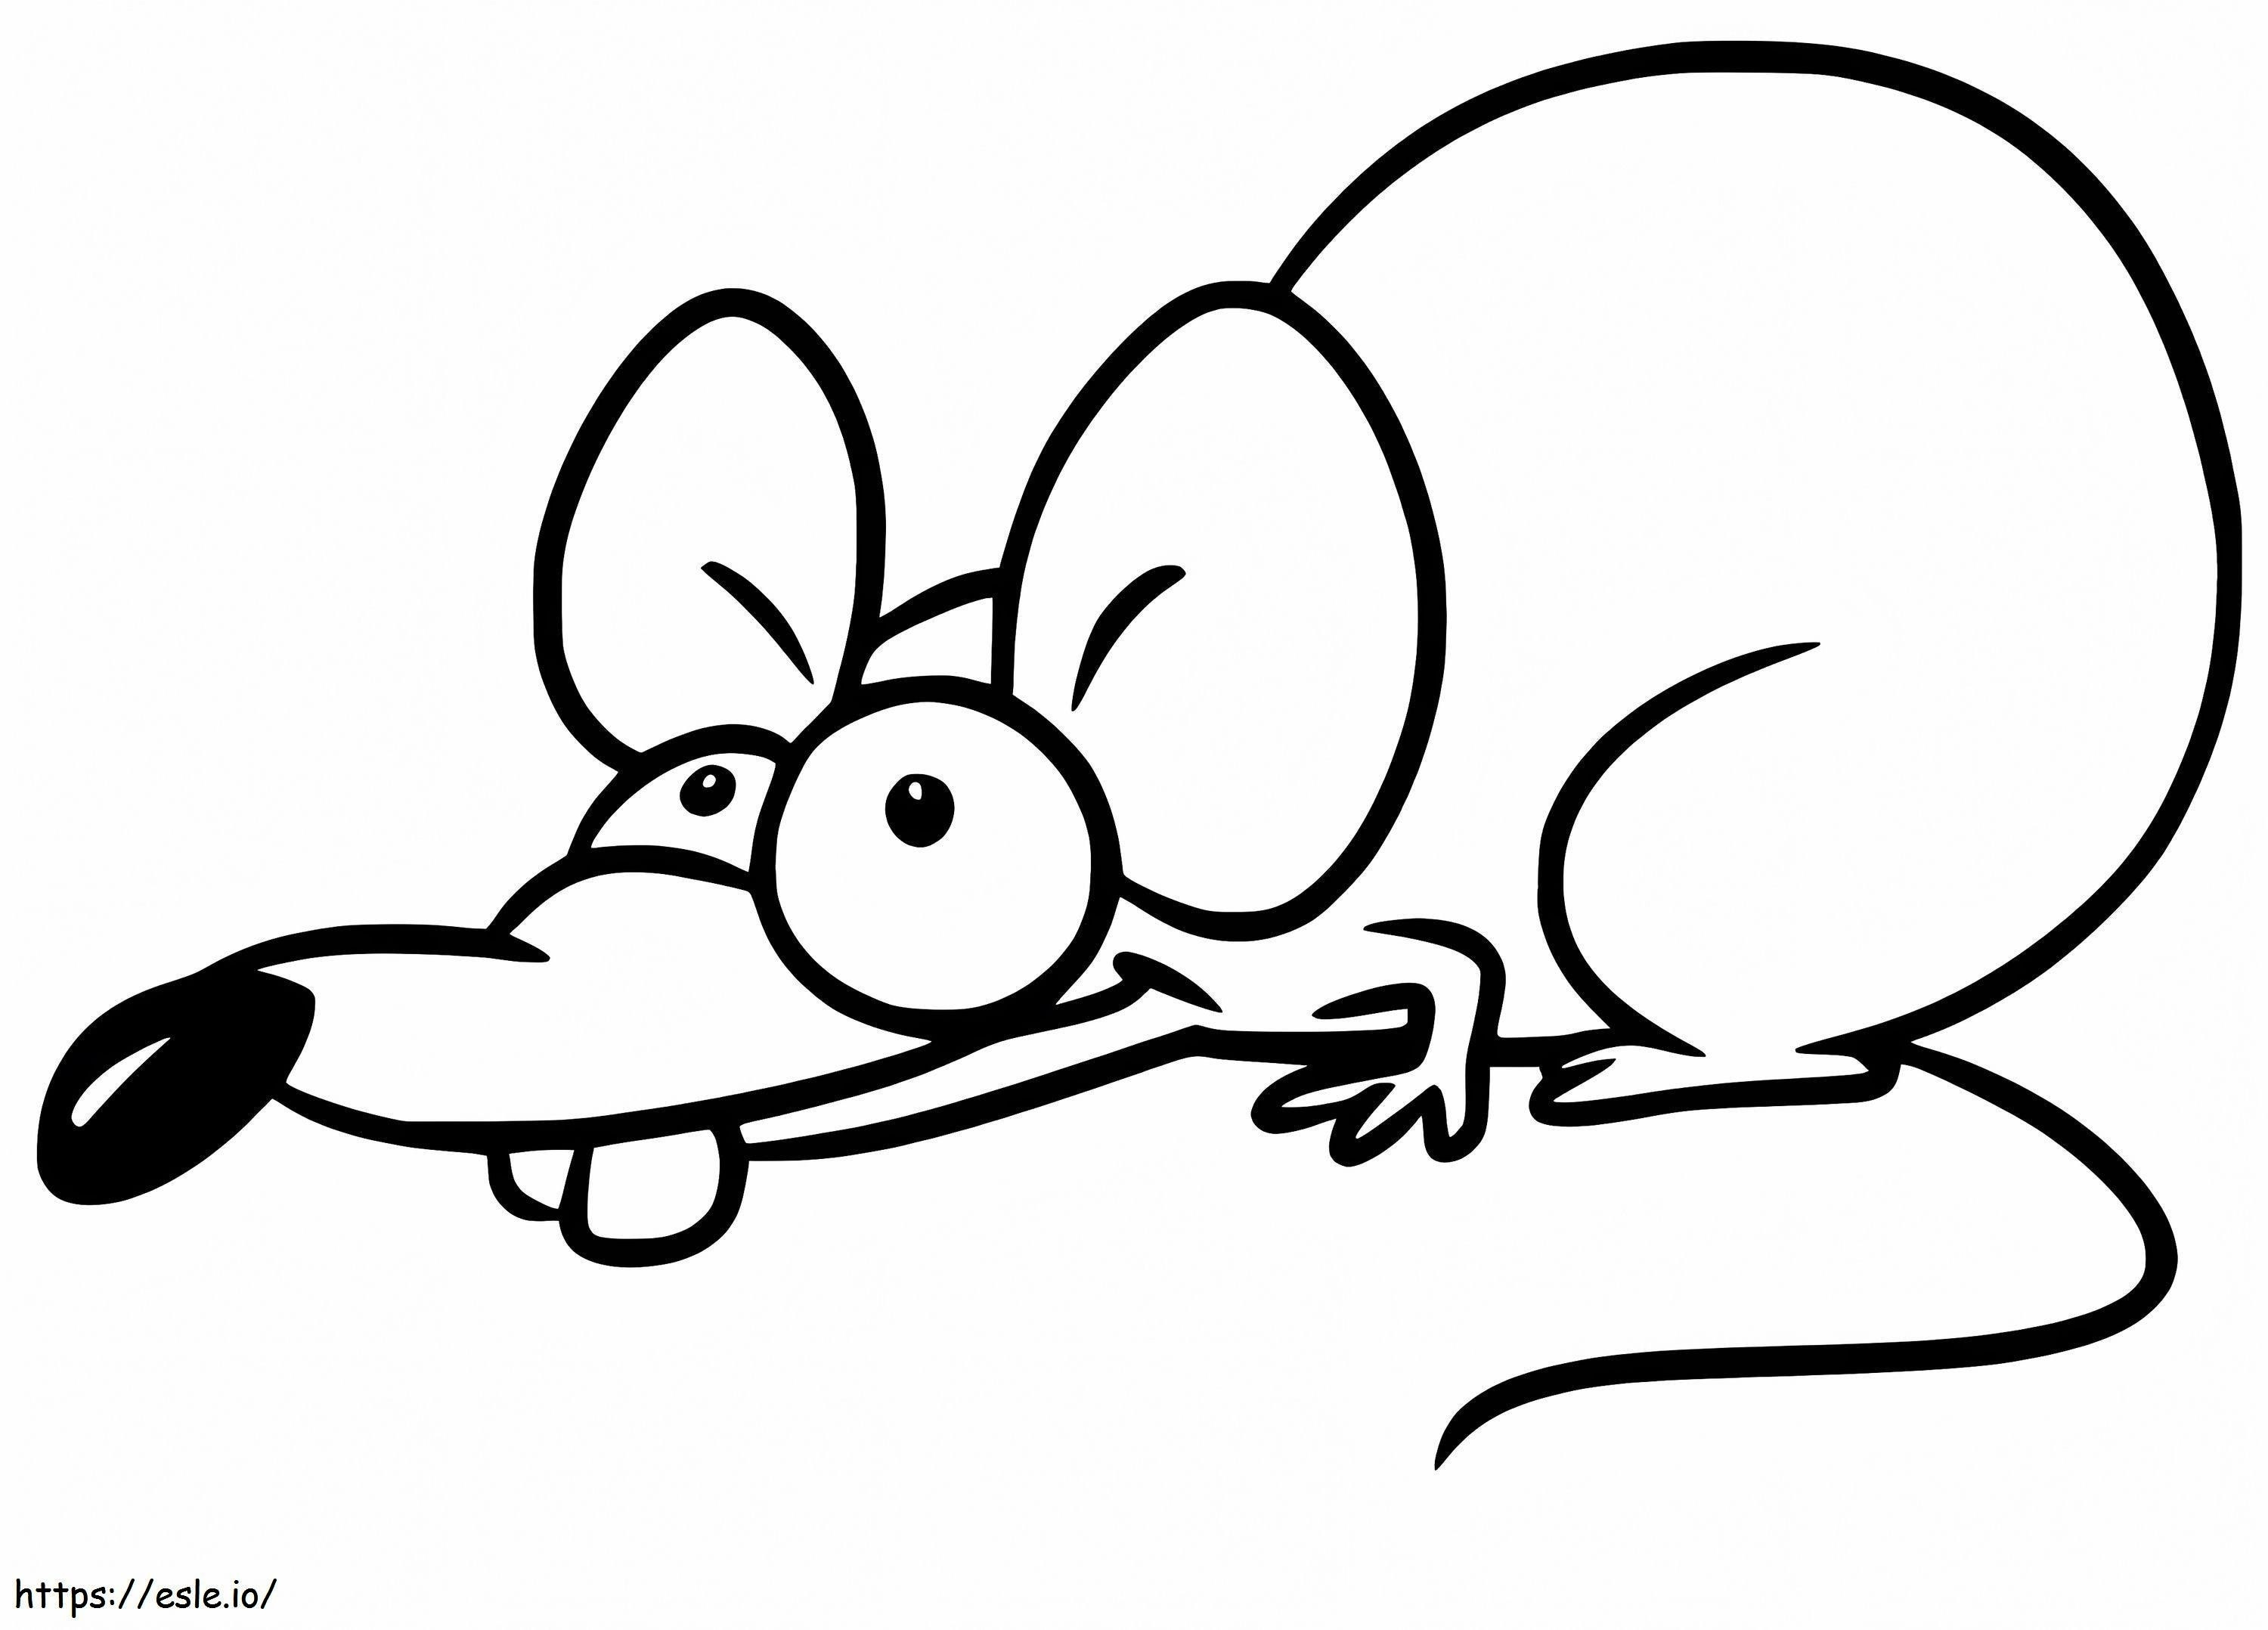 Foxy Rat coloring page